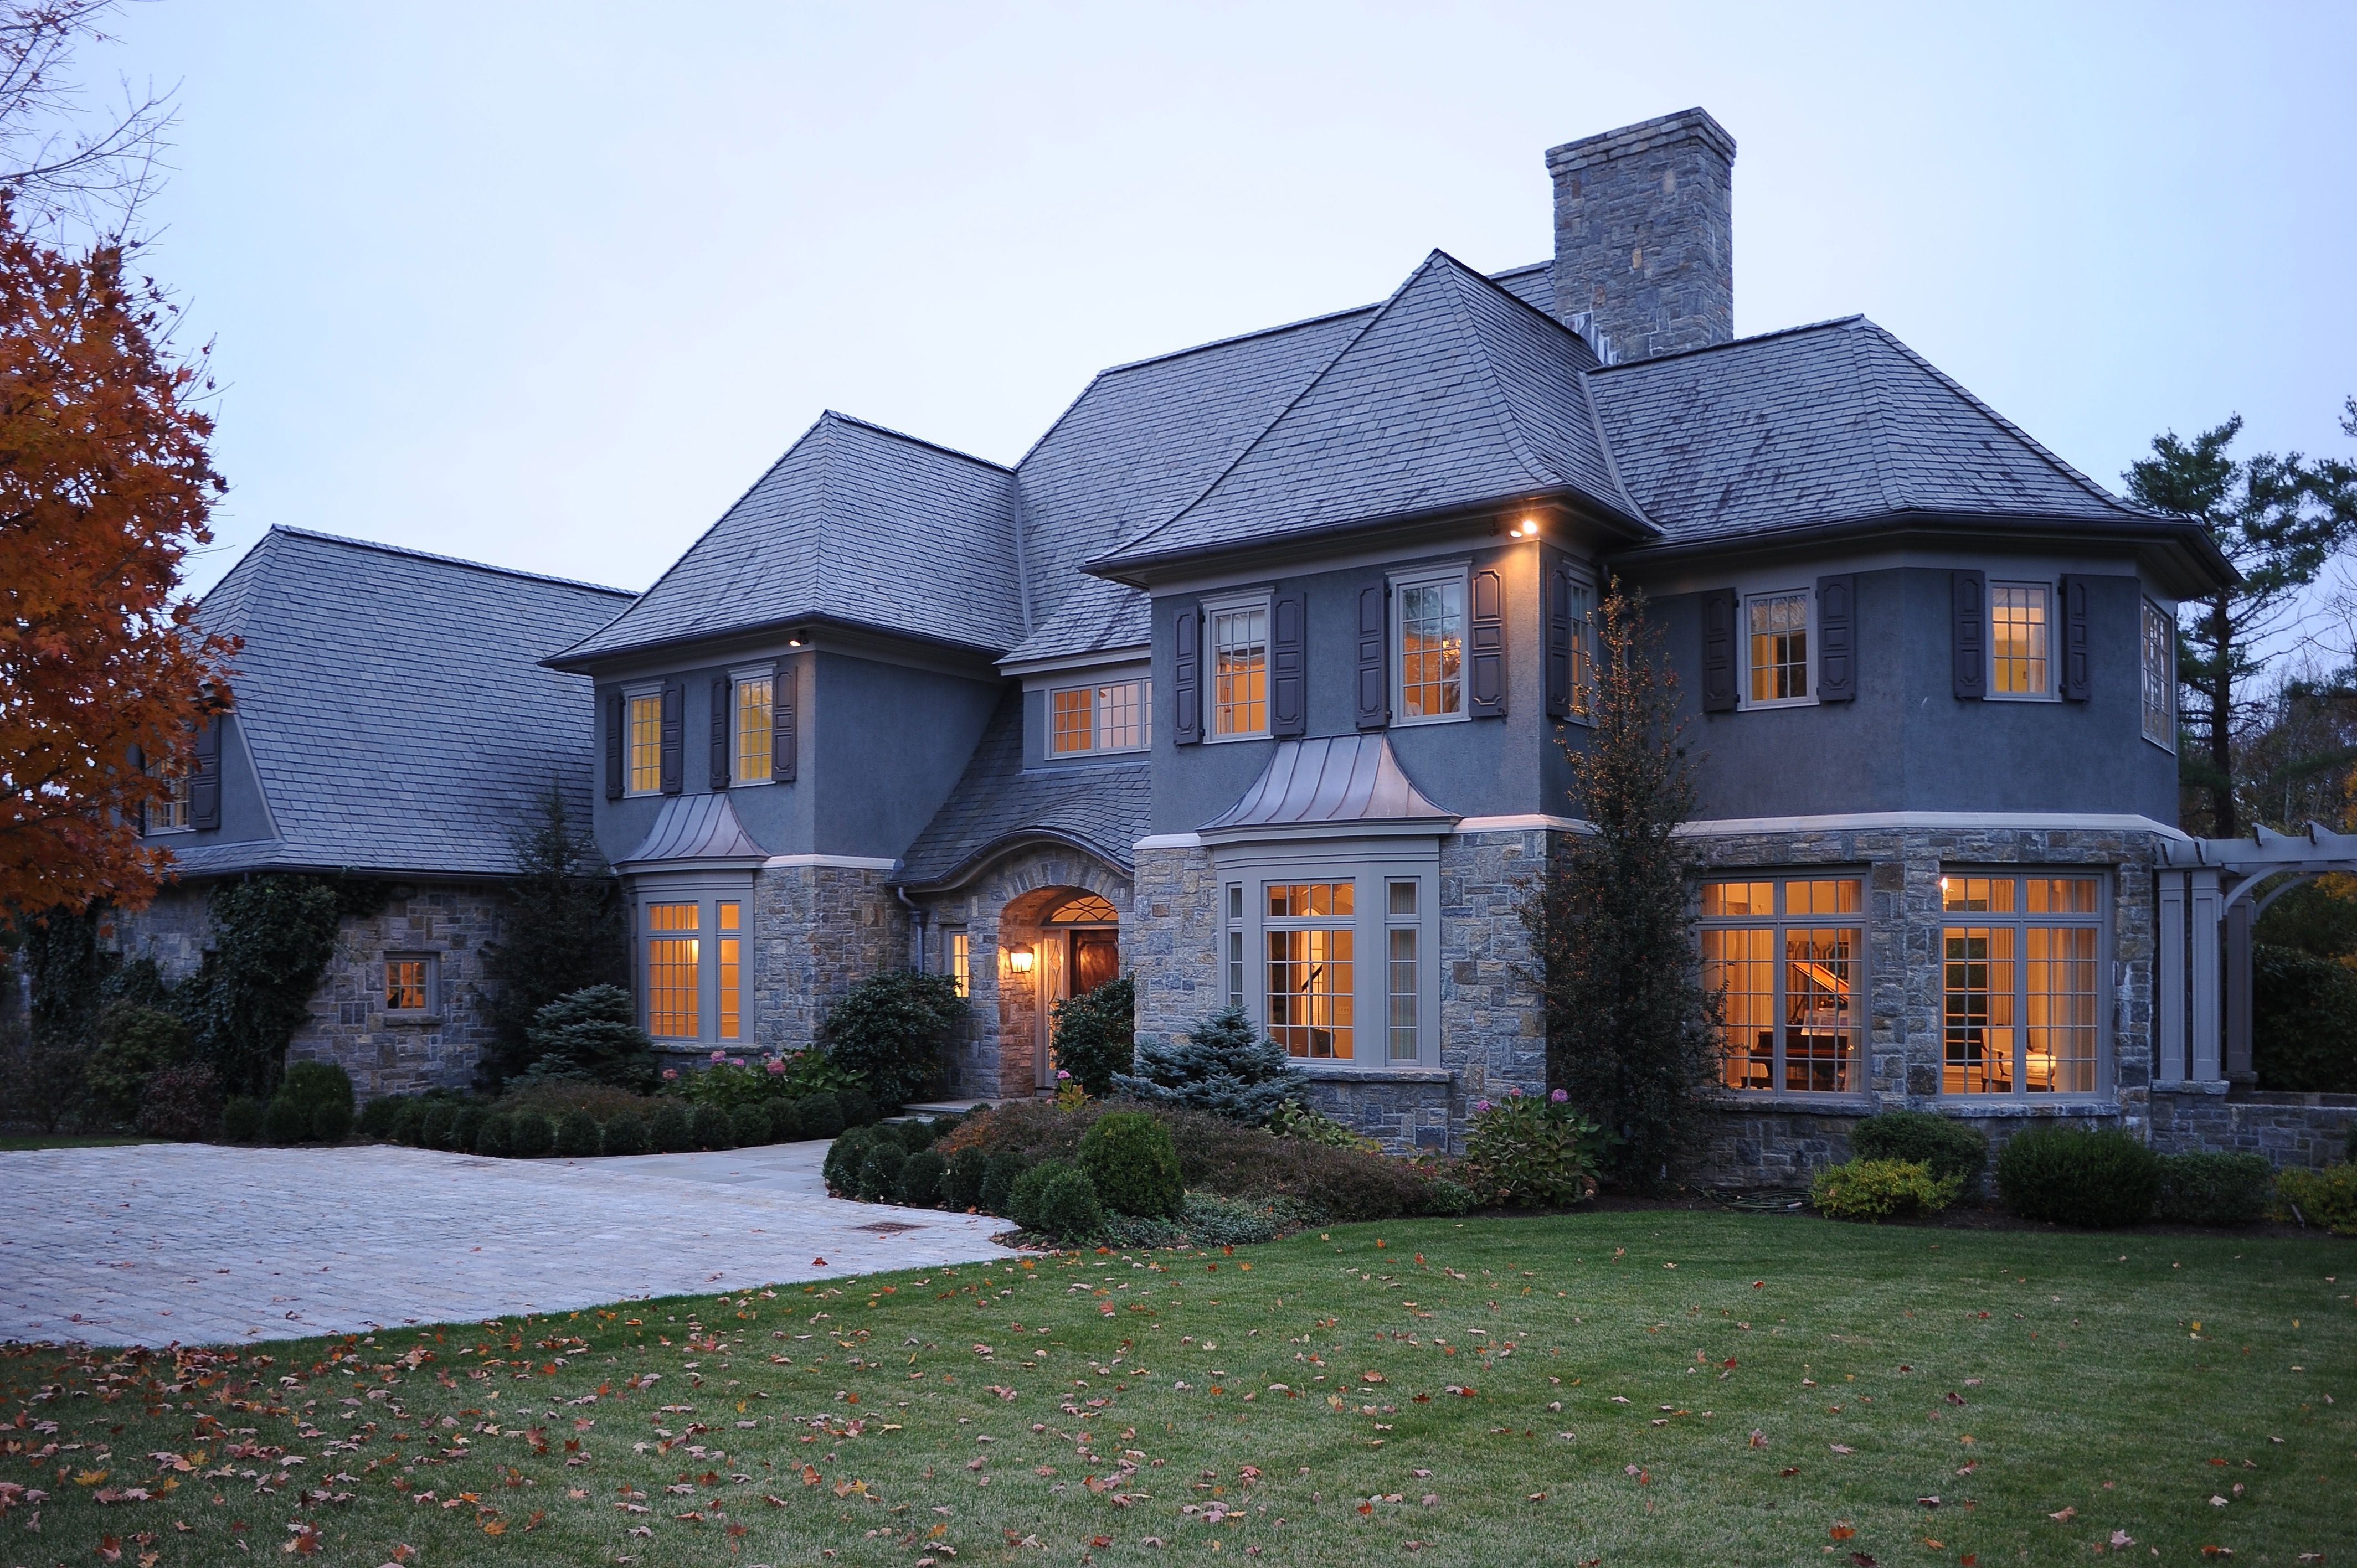 Gray French Country Exterior  (Image 16 of 23)